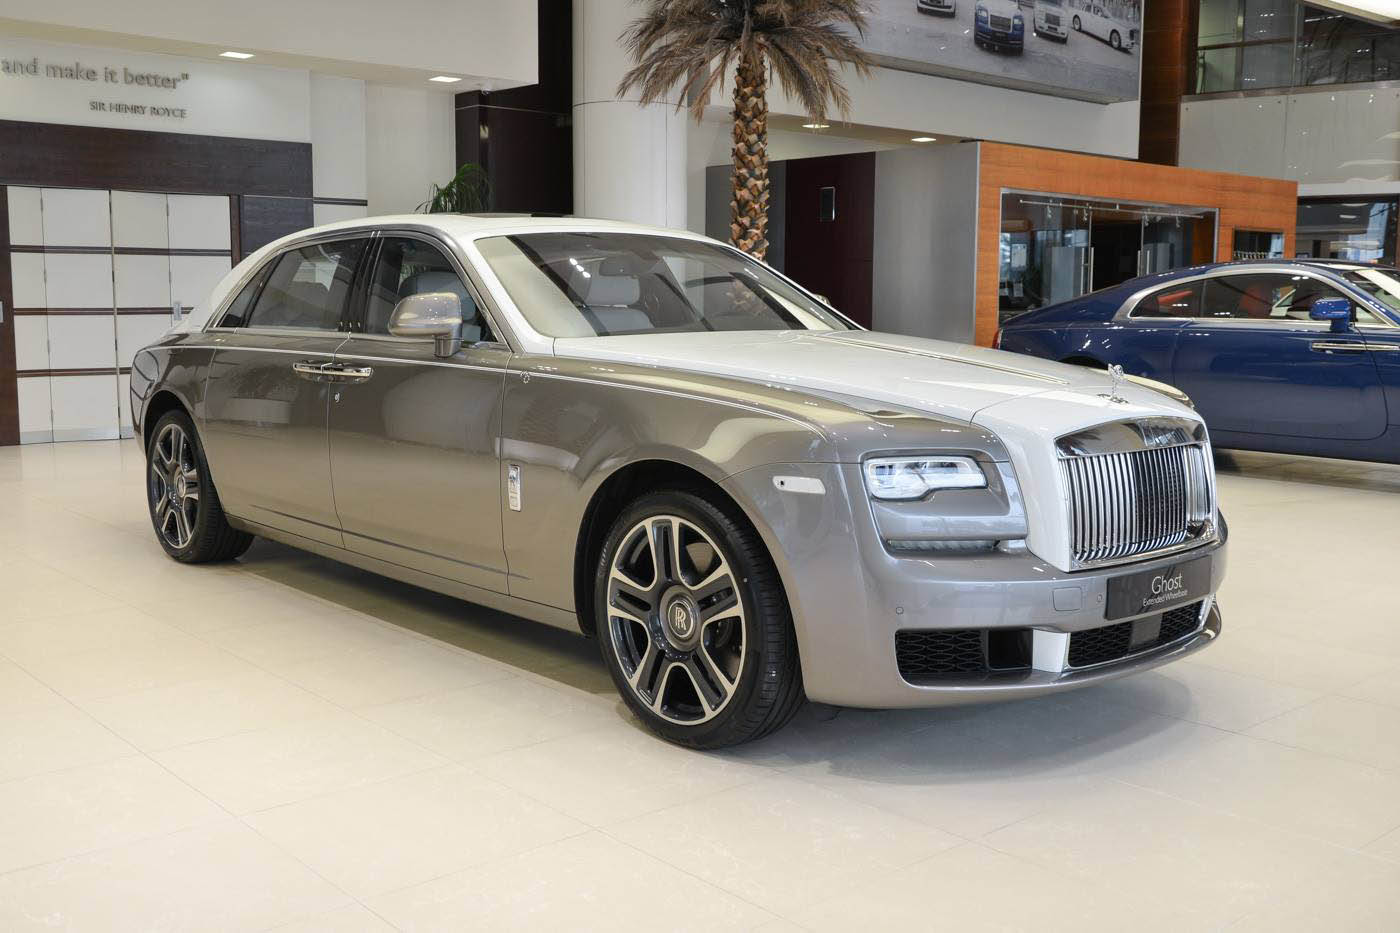 Bespoke Rolls-Royce Ghost For Sale At Abu Dhabi Is Inspired By Islamic ...